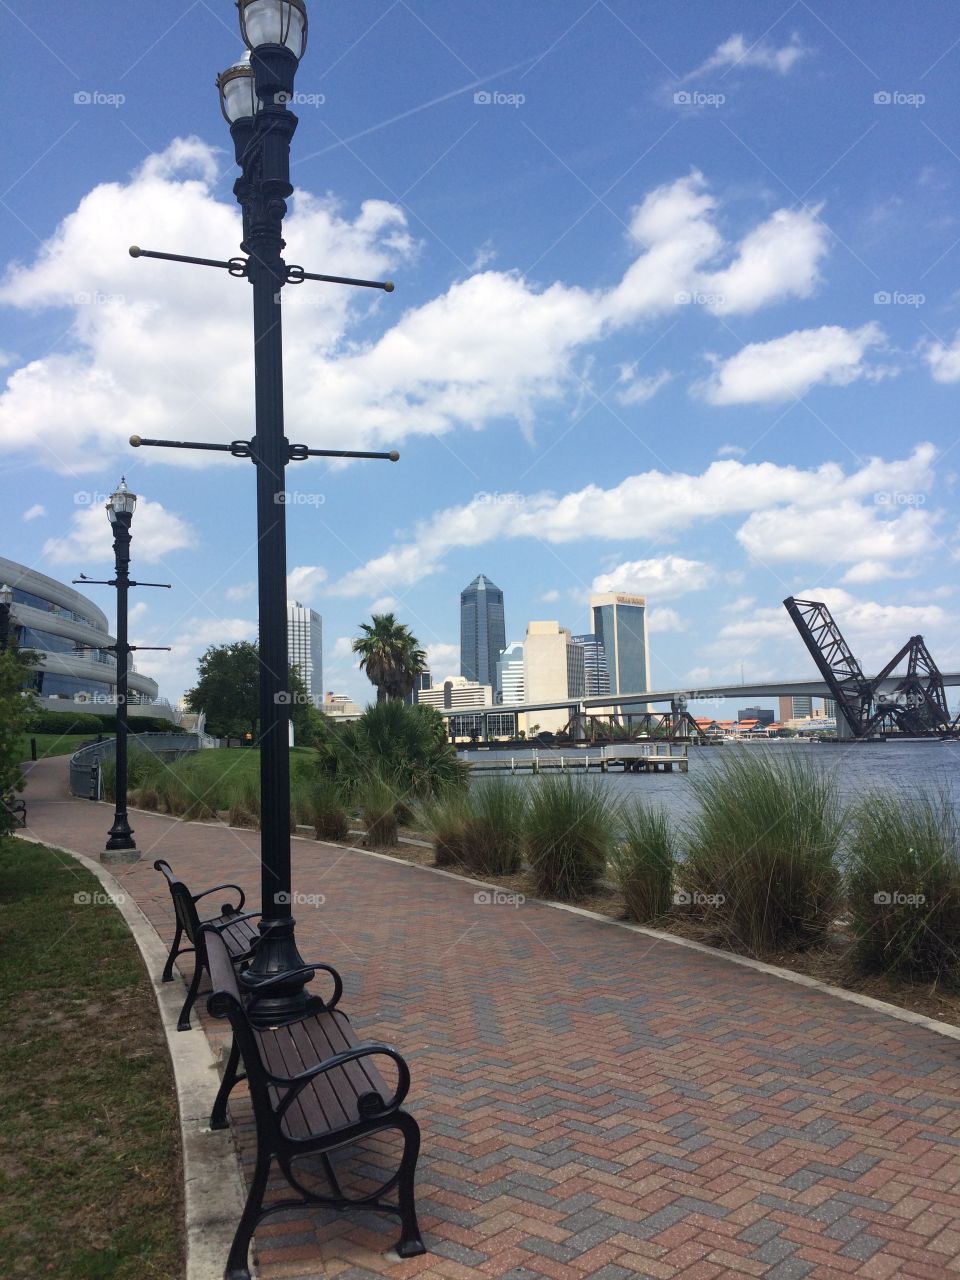 Downtown Jacksonville, Florida, from a distance.